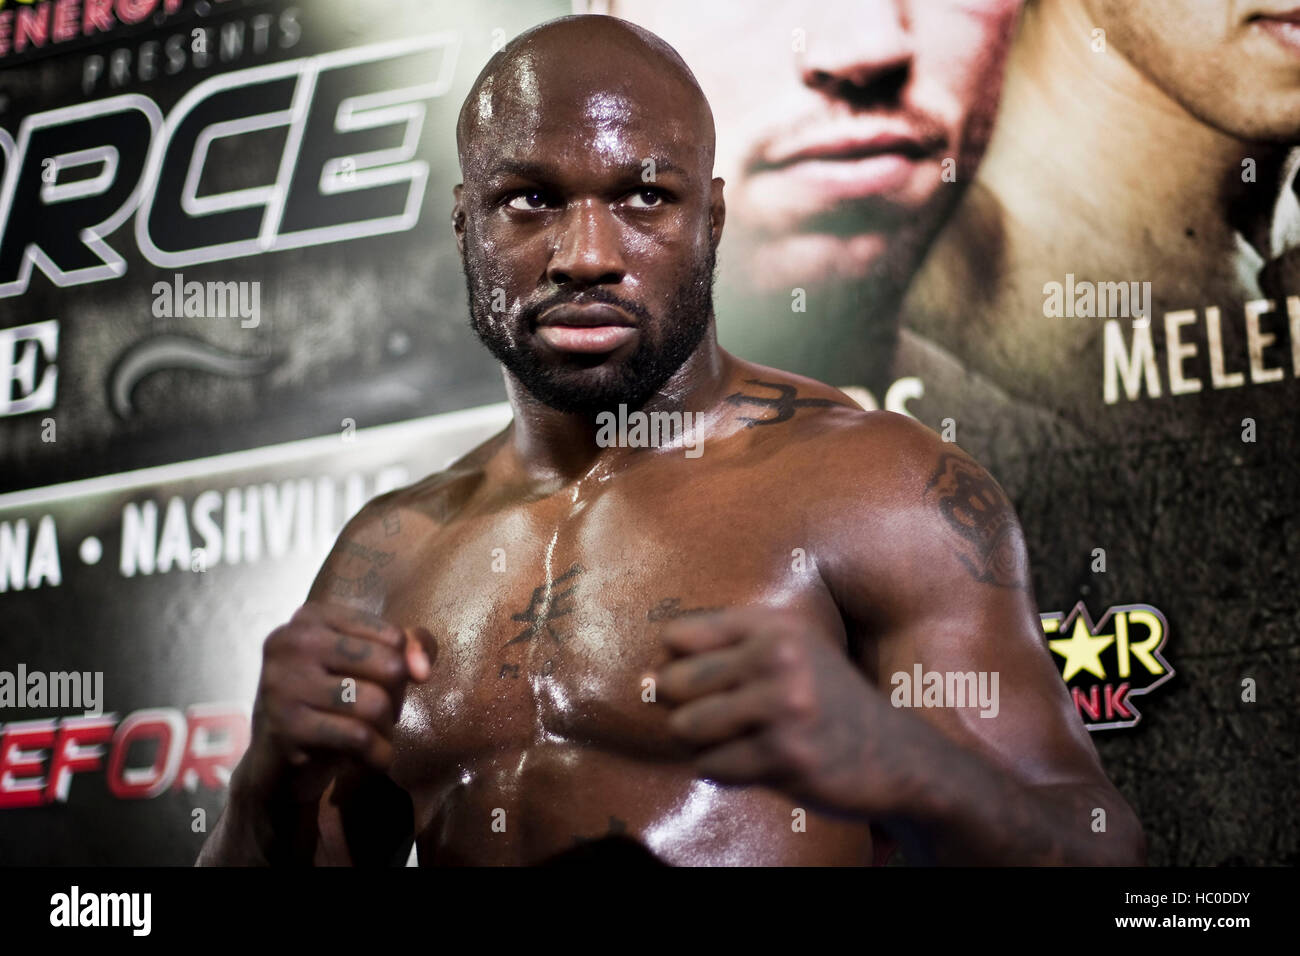 Muhammed 'King Mo' Lawal at a workout session at the Legends gym on March 17, 2010 in Hollywood, California. Photo by Francis Specker Stock Photo